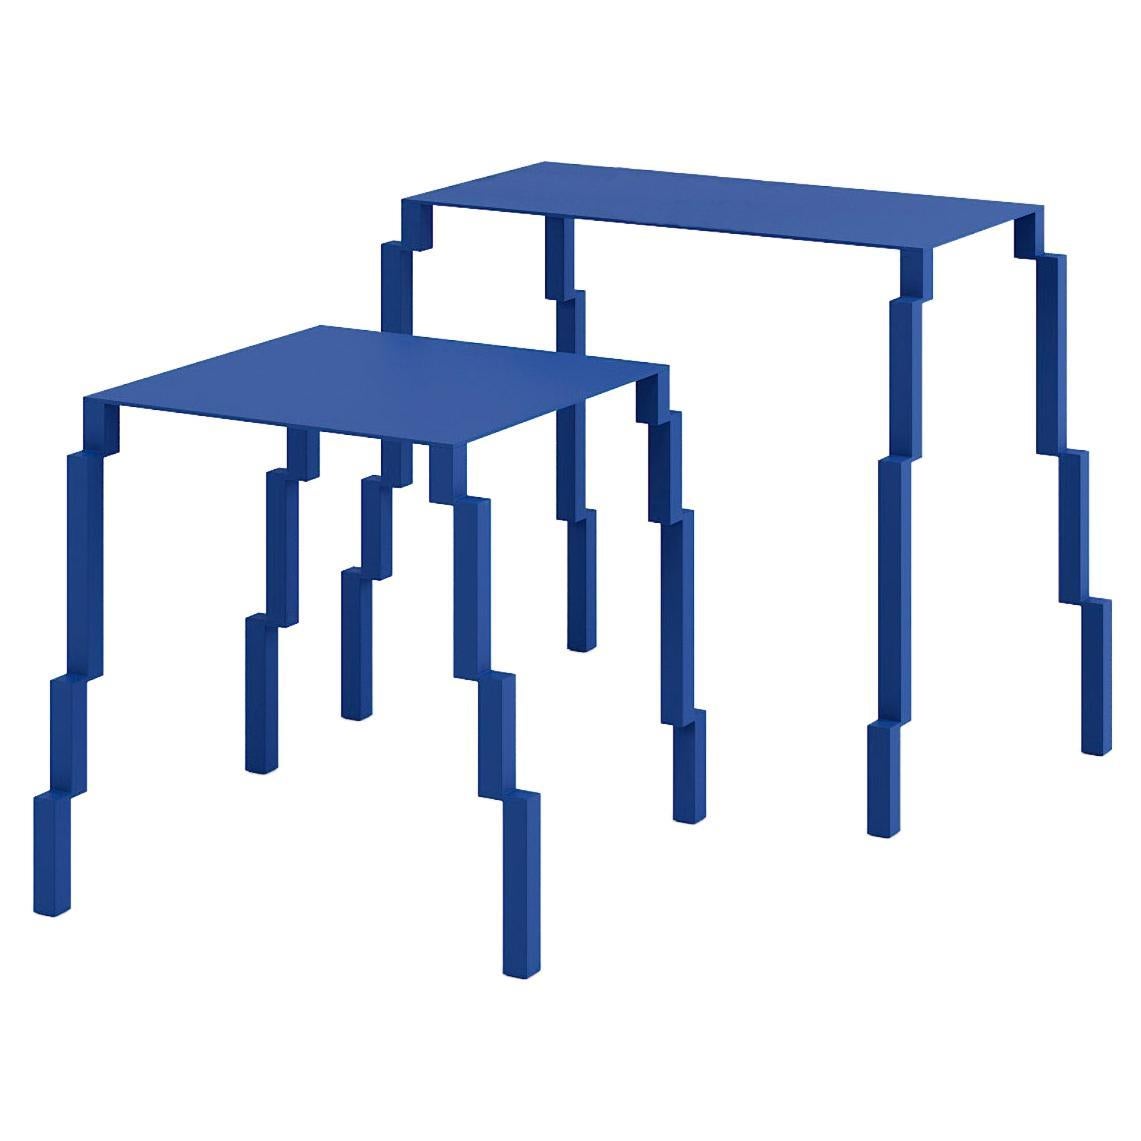 "BUG set" Side Tables (any color) by Oitoproducts For Sale